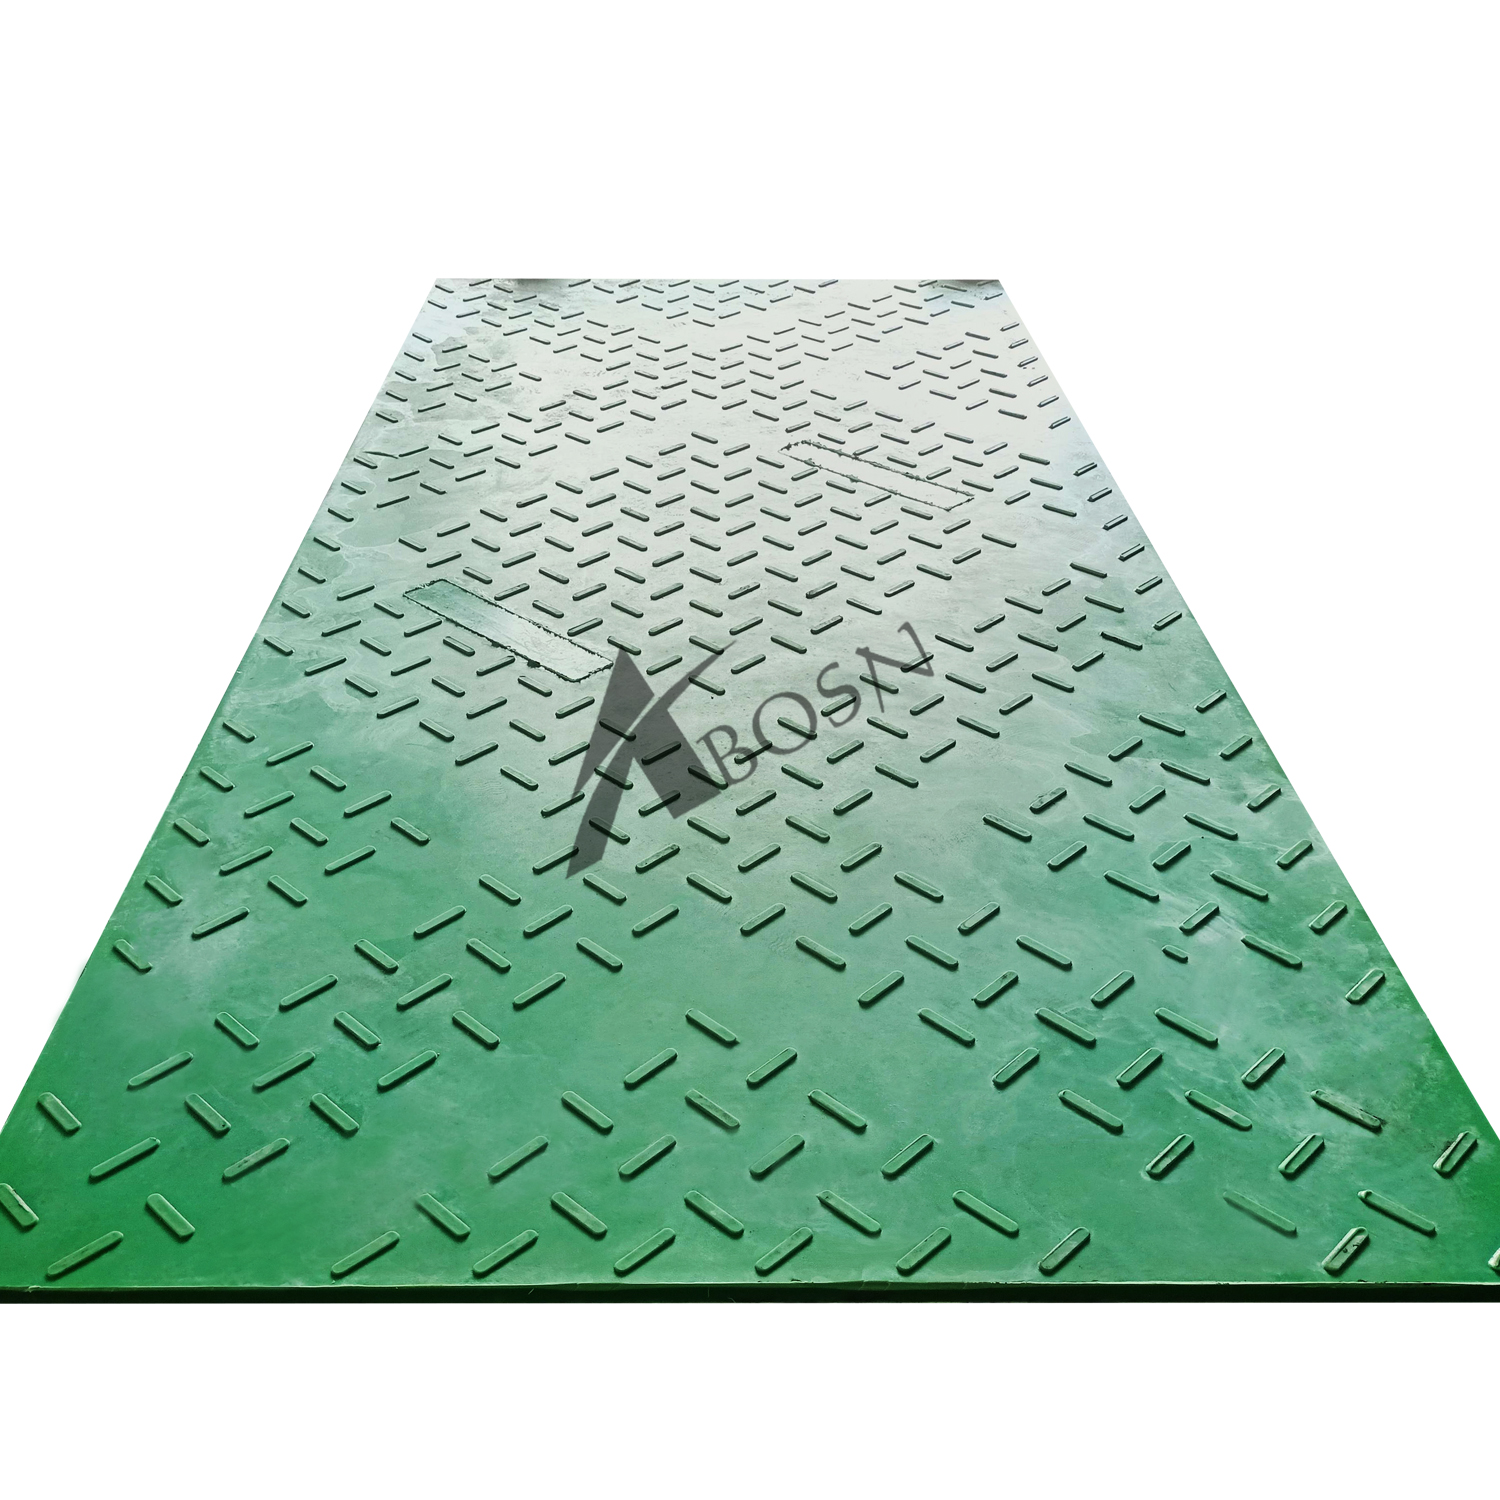 Durable Portable Heavy-Duty Temporary Roadway Ground Protection Mats